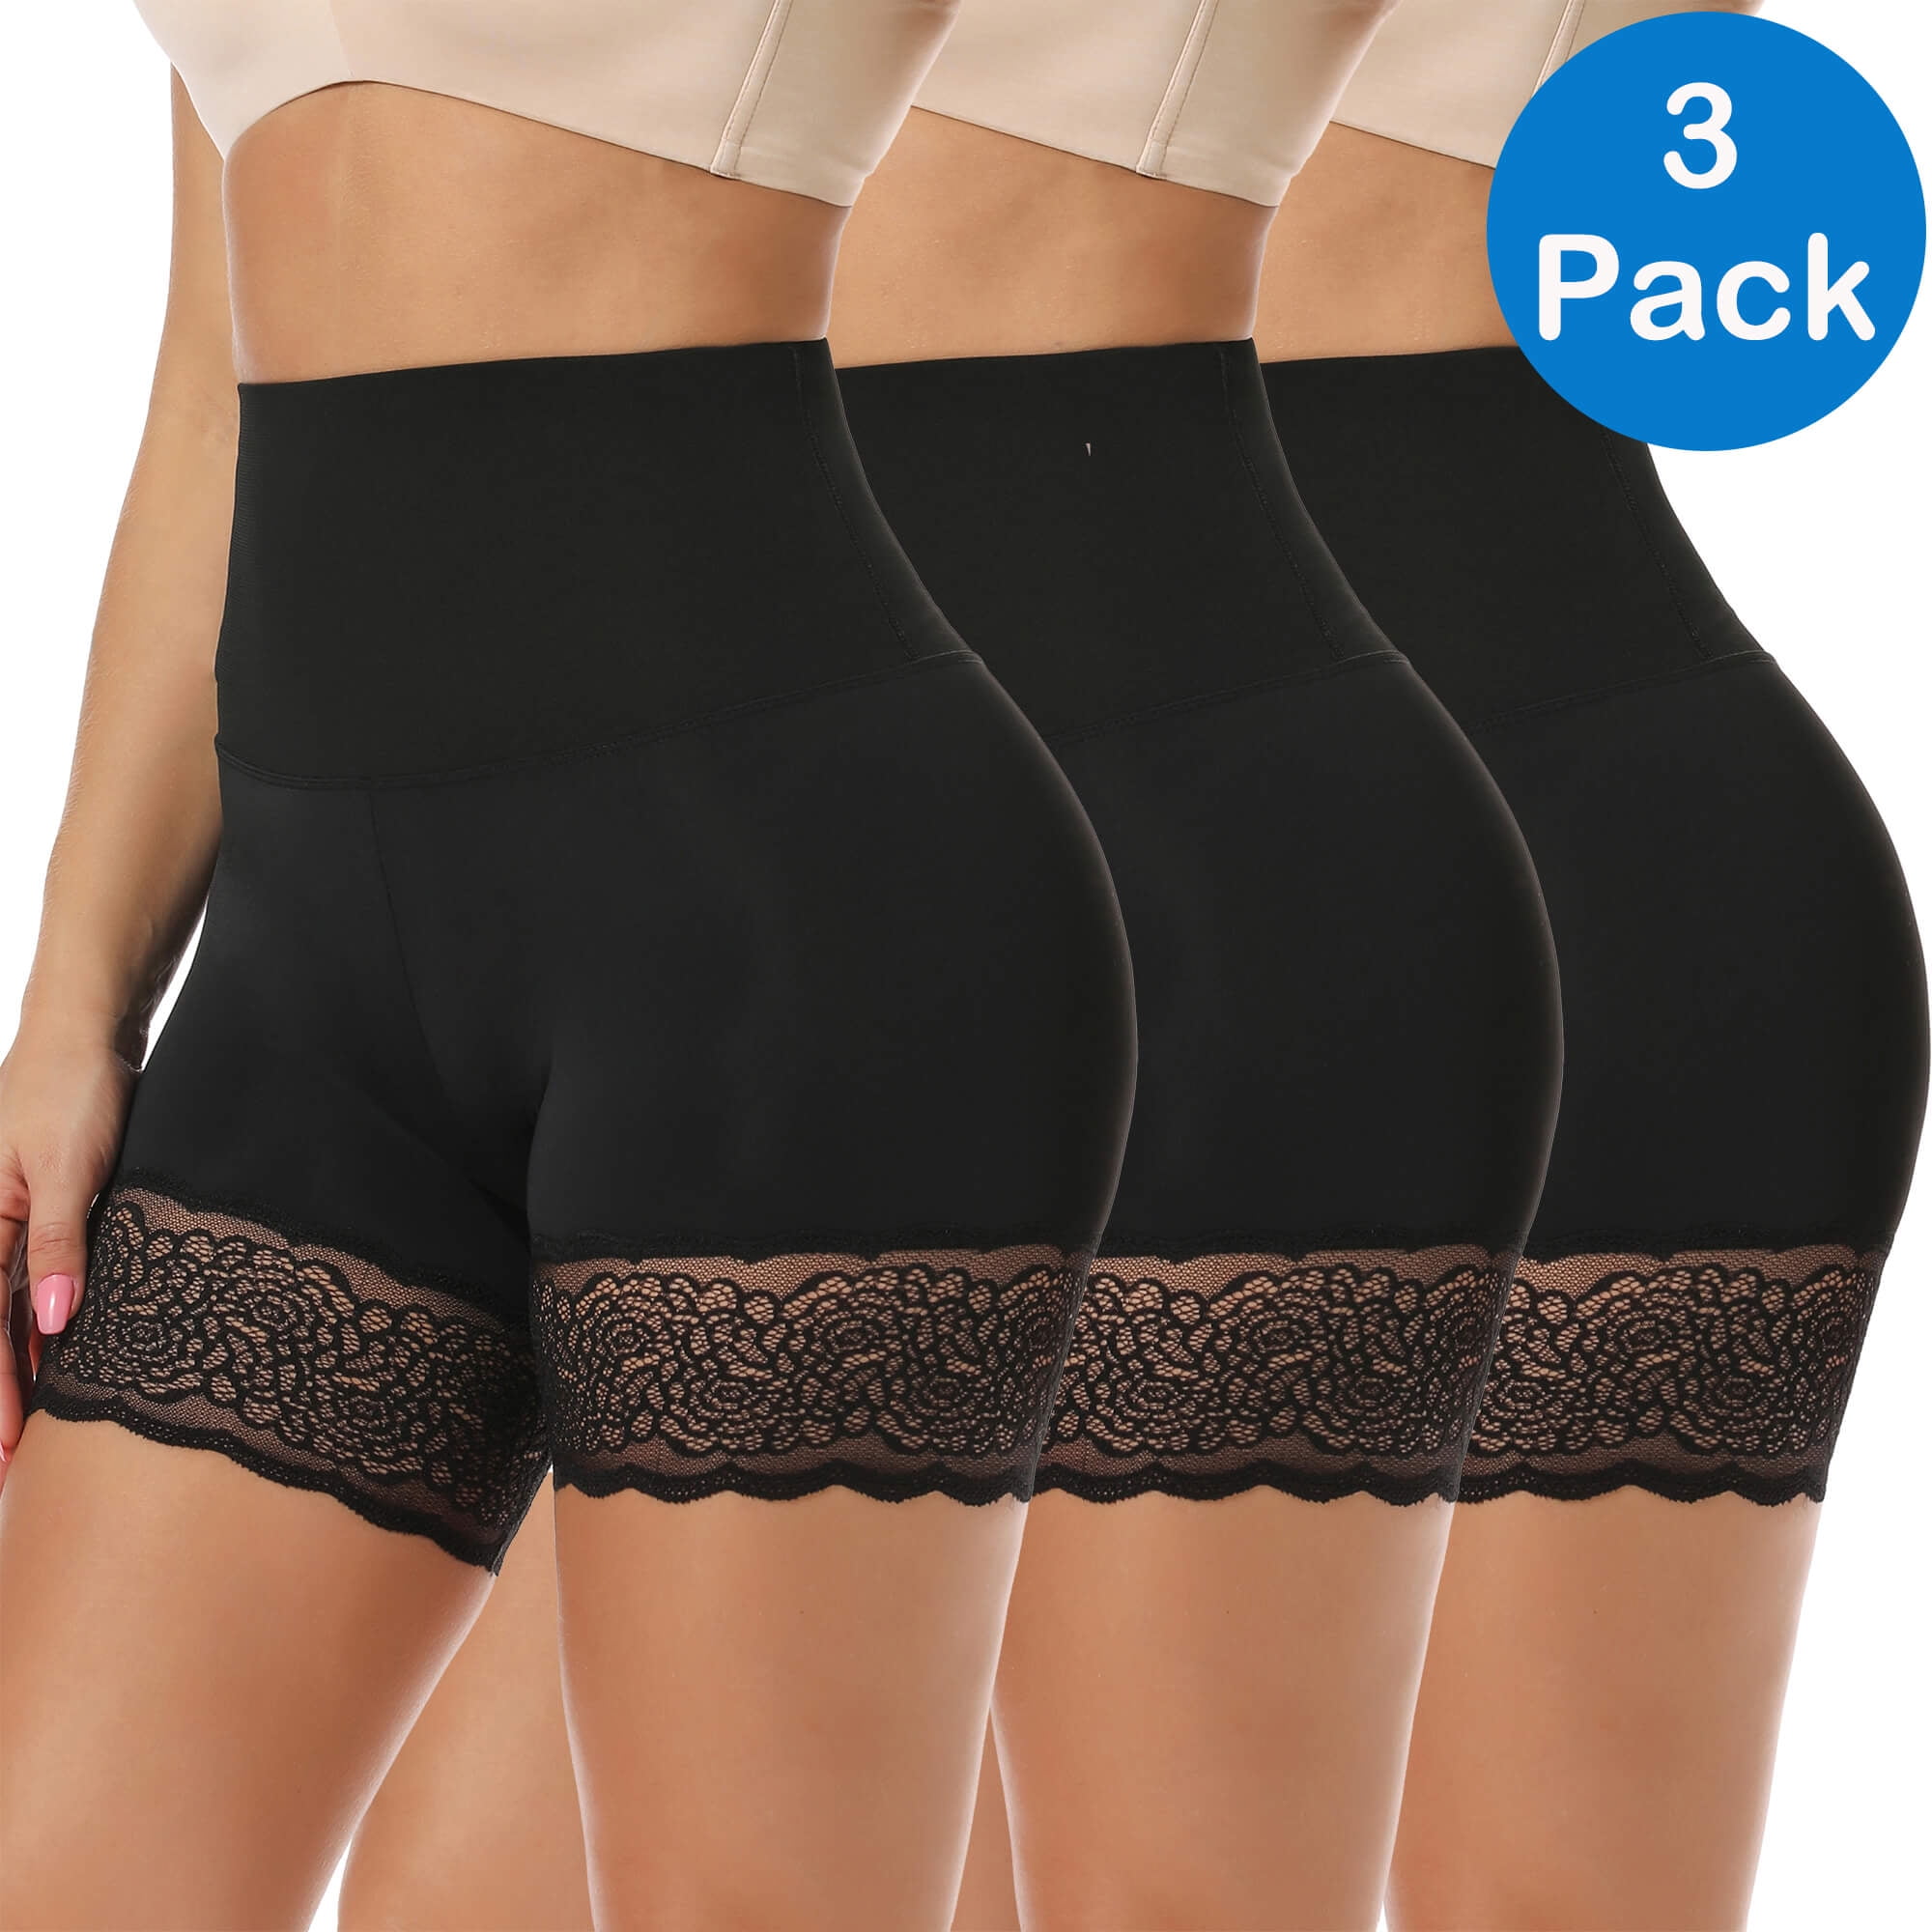 ZunFeo Anti Chafing Slip Shorts for Women Under Dress Seamless Spandex  Shorts Floral Lace Butt Lifting Dressy Leggings